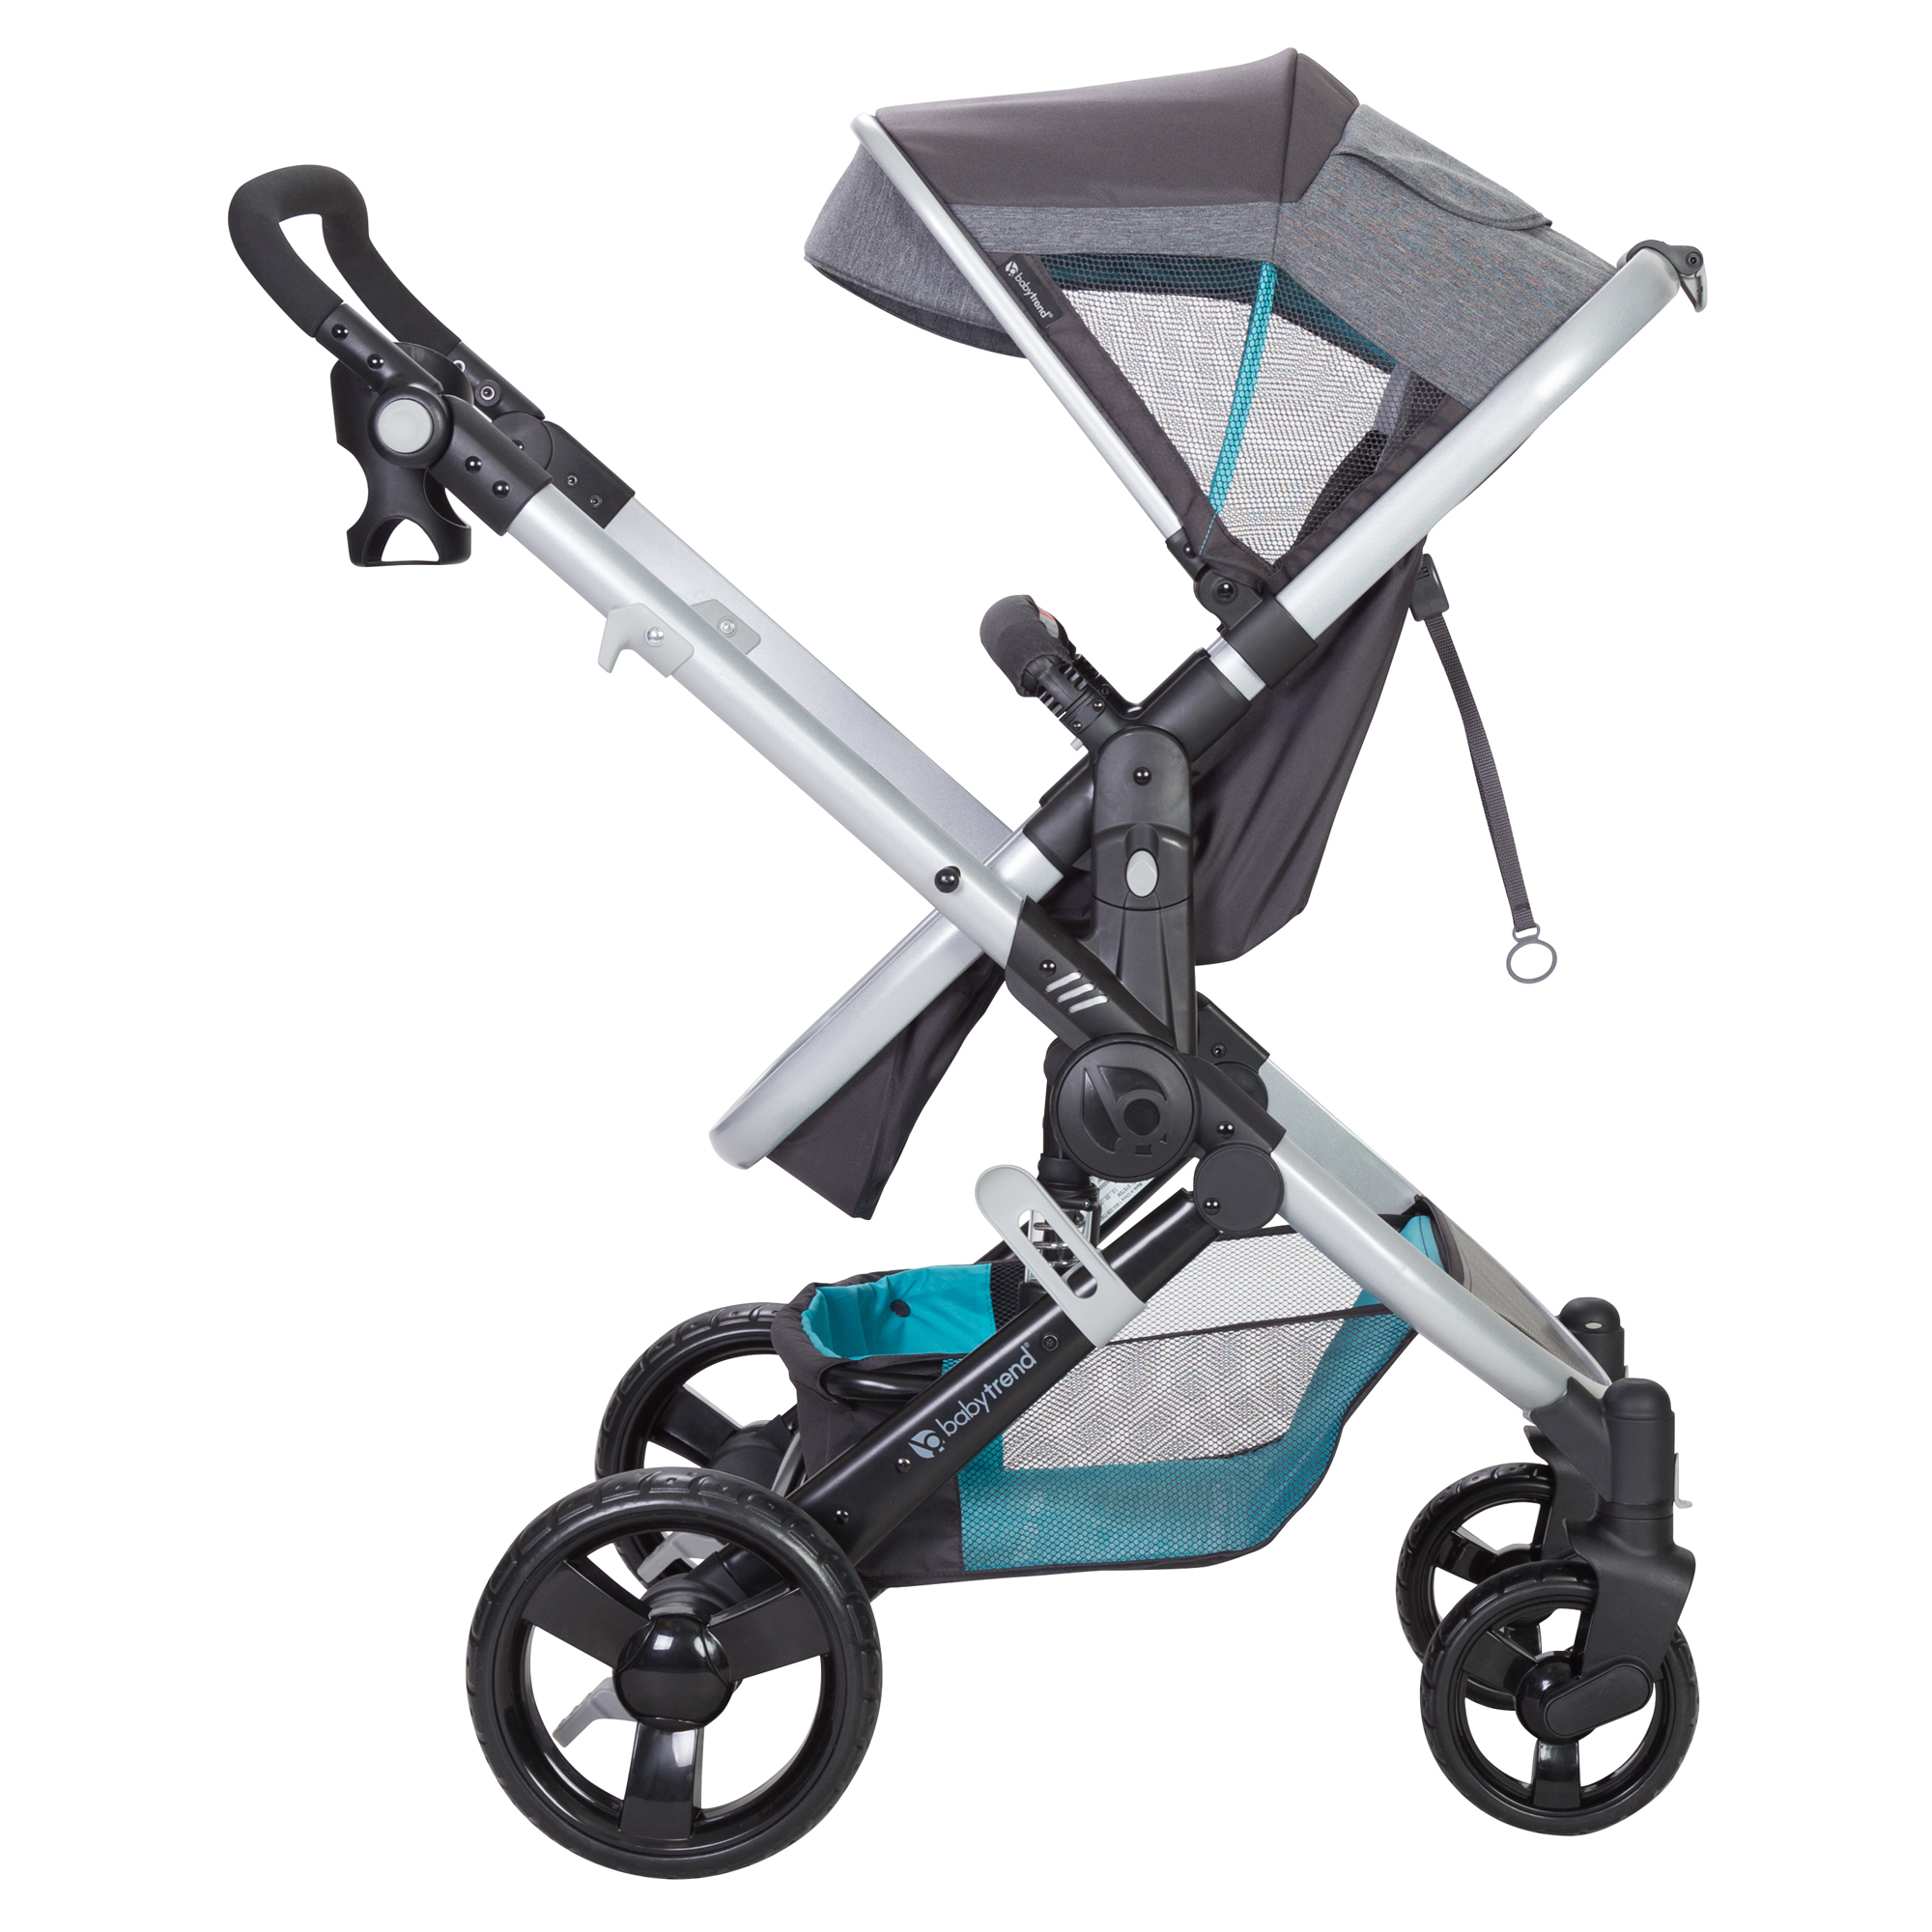 Baby Trend Espy Travel System Stroller, Paramount - image 4 of 6